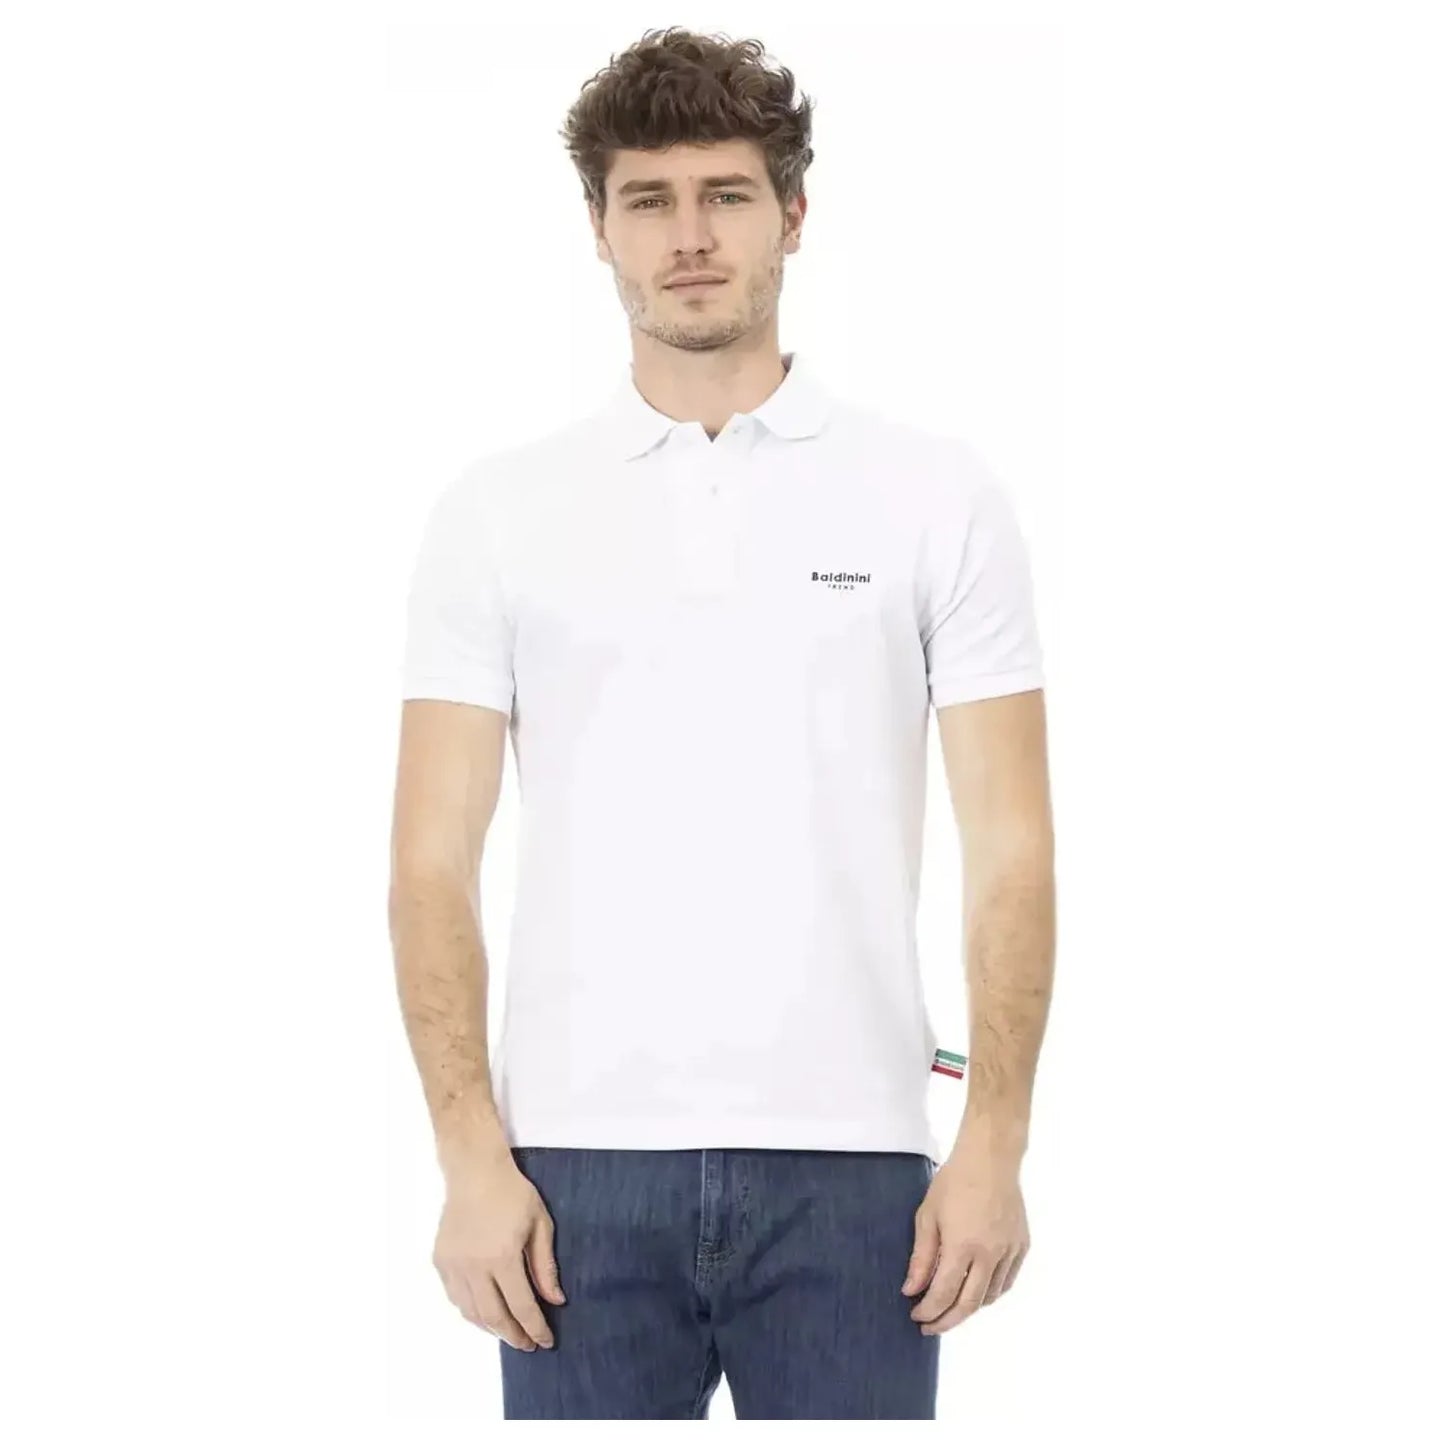 Baldinini Trend Chic White Embroidered Polo with Short Sleeves white-cotton-polo-shirt-16